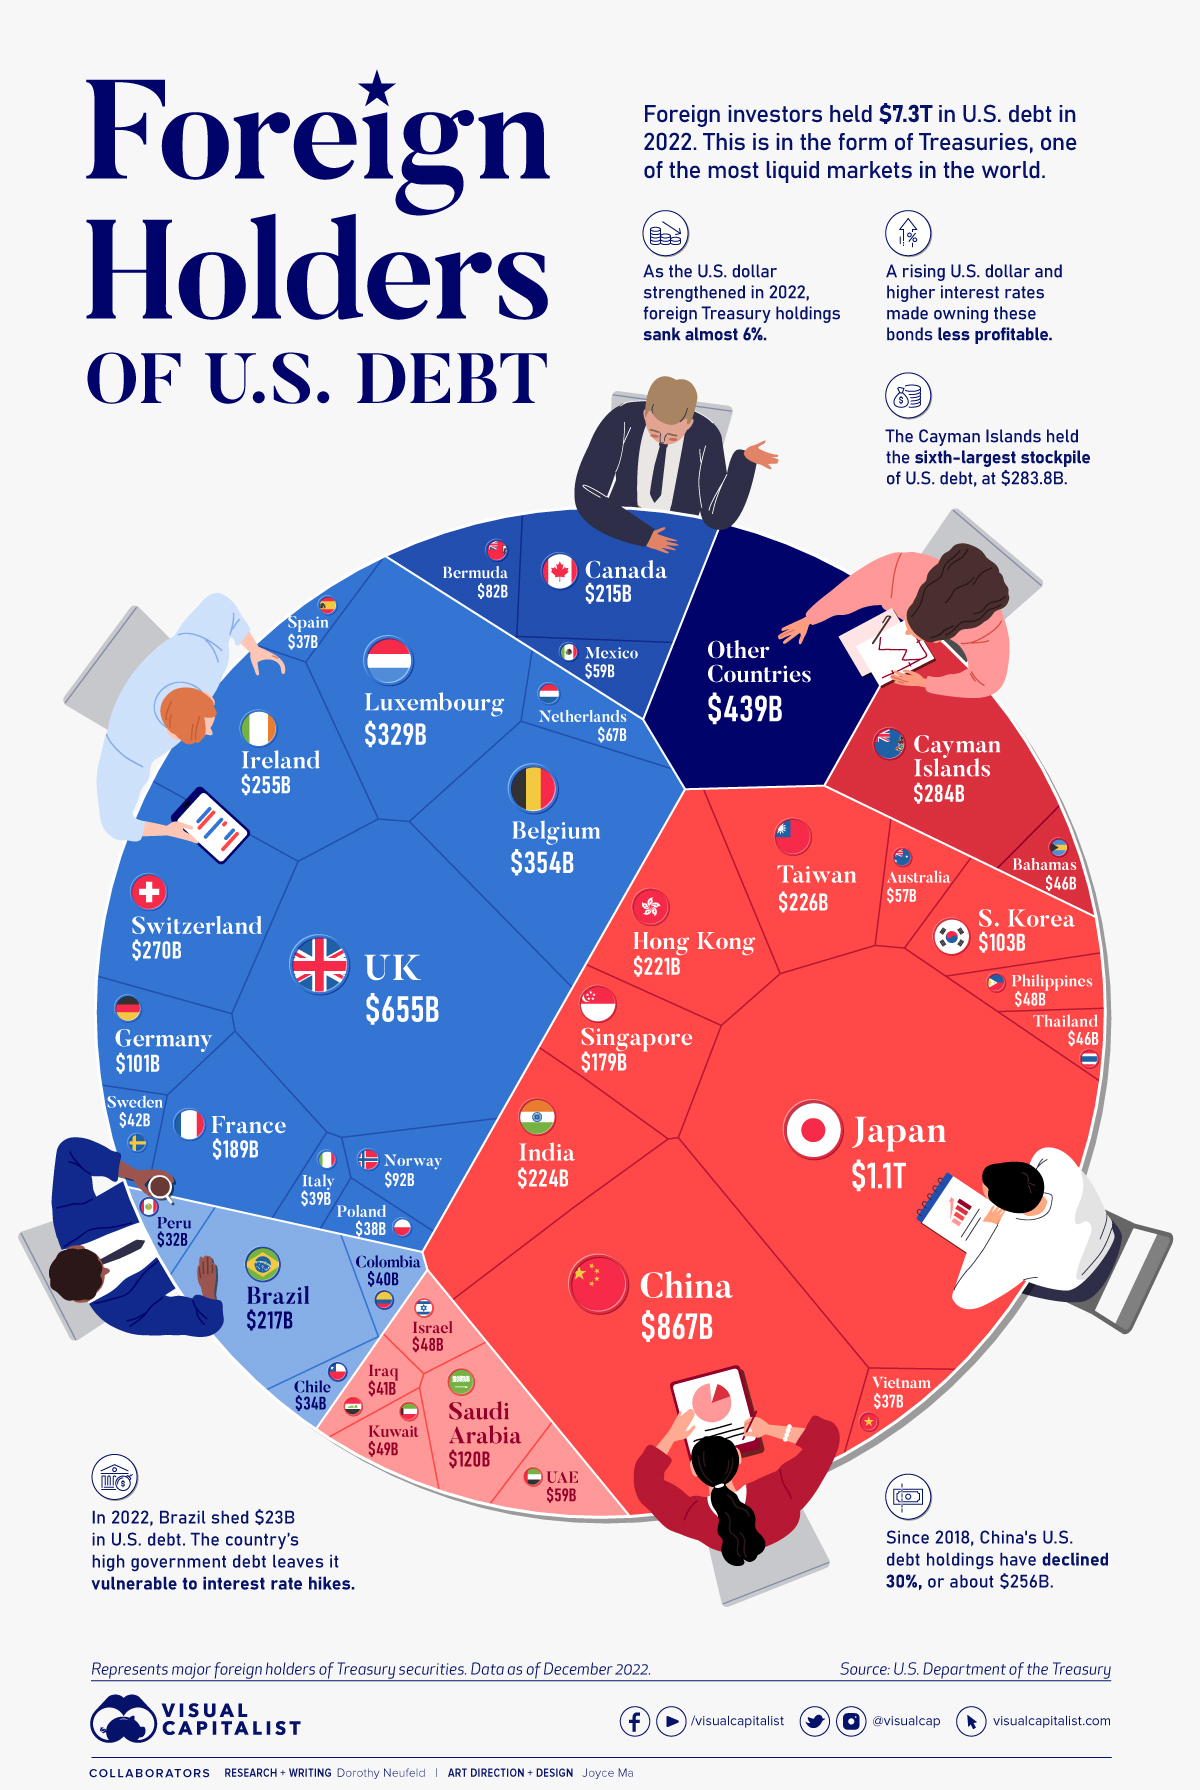 Chart showing which countries hold the most U.S. debt